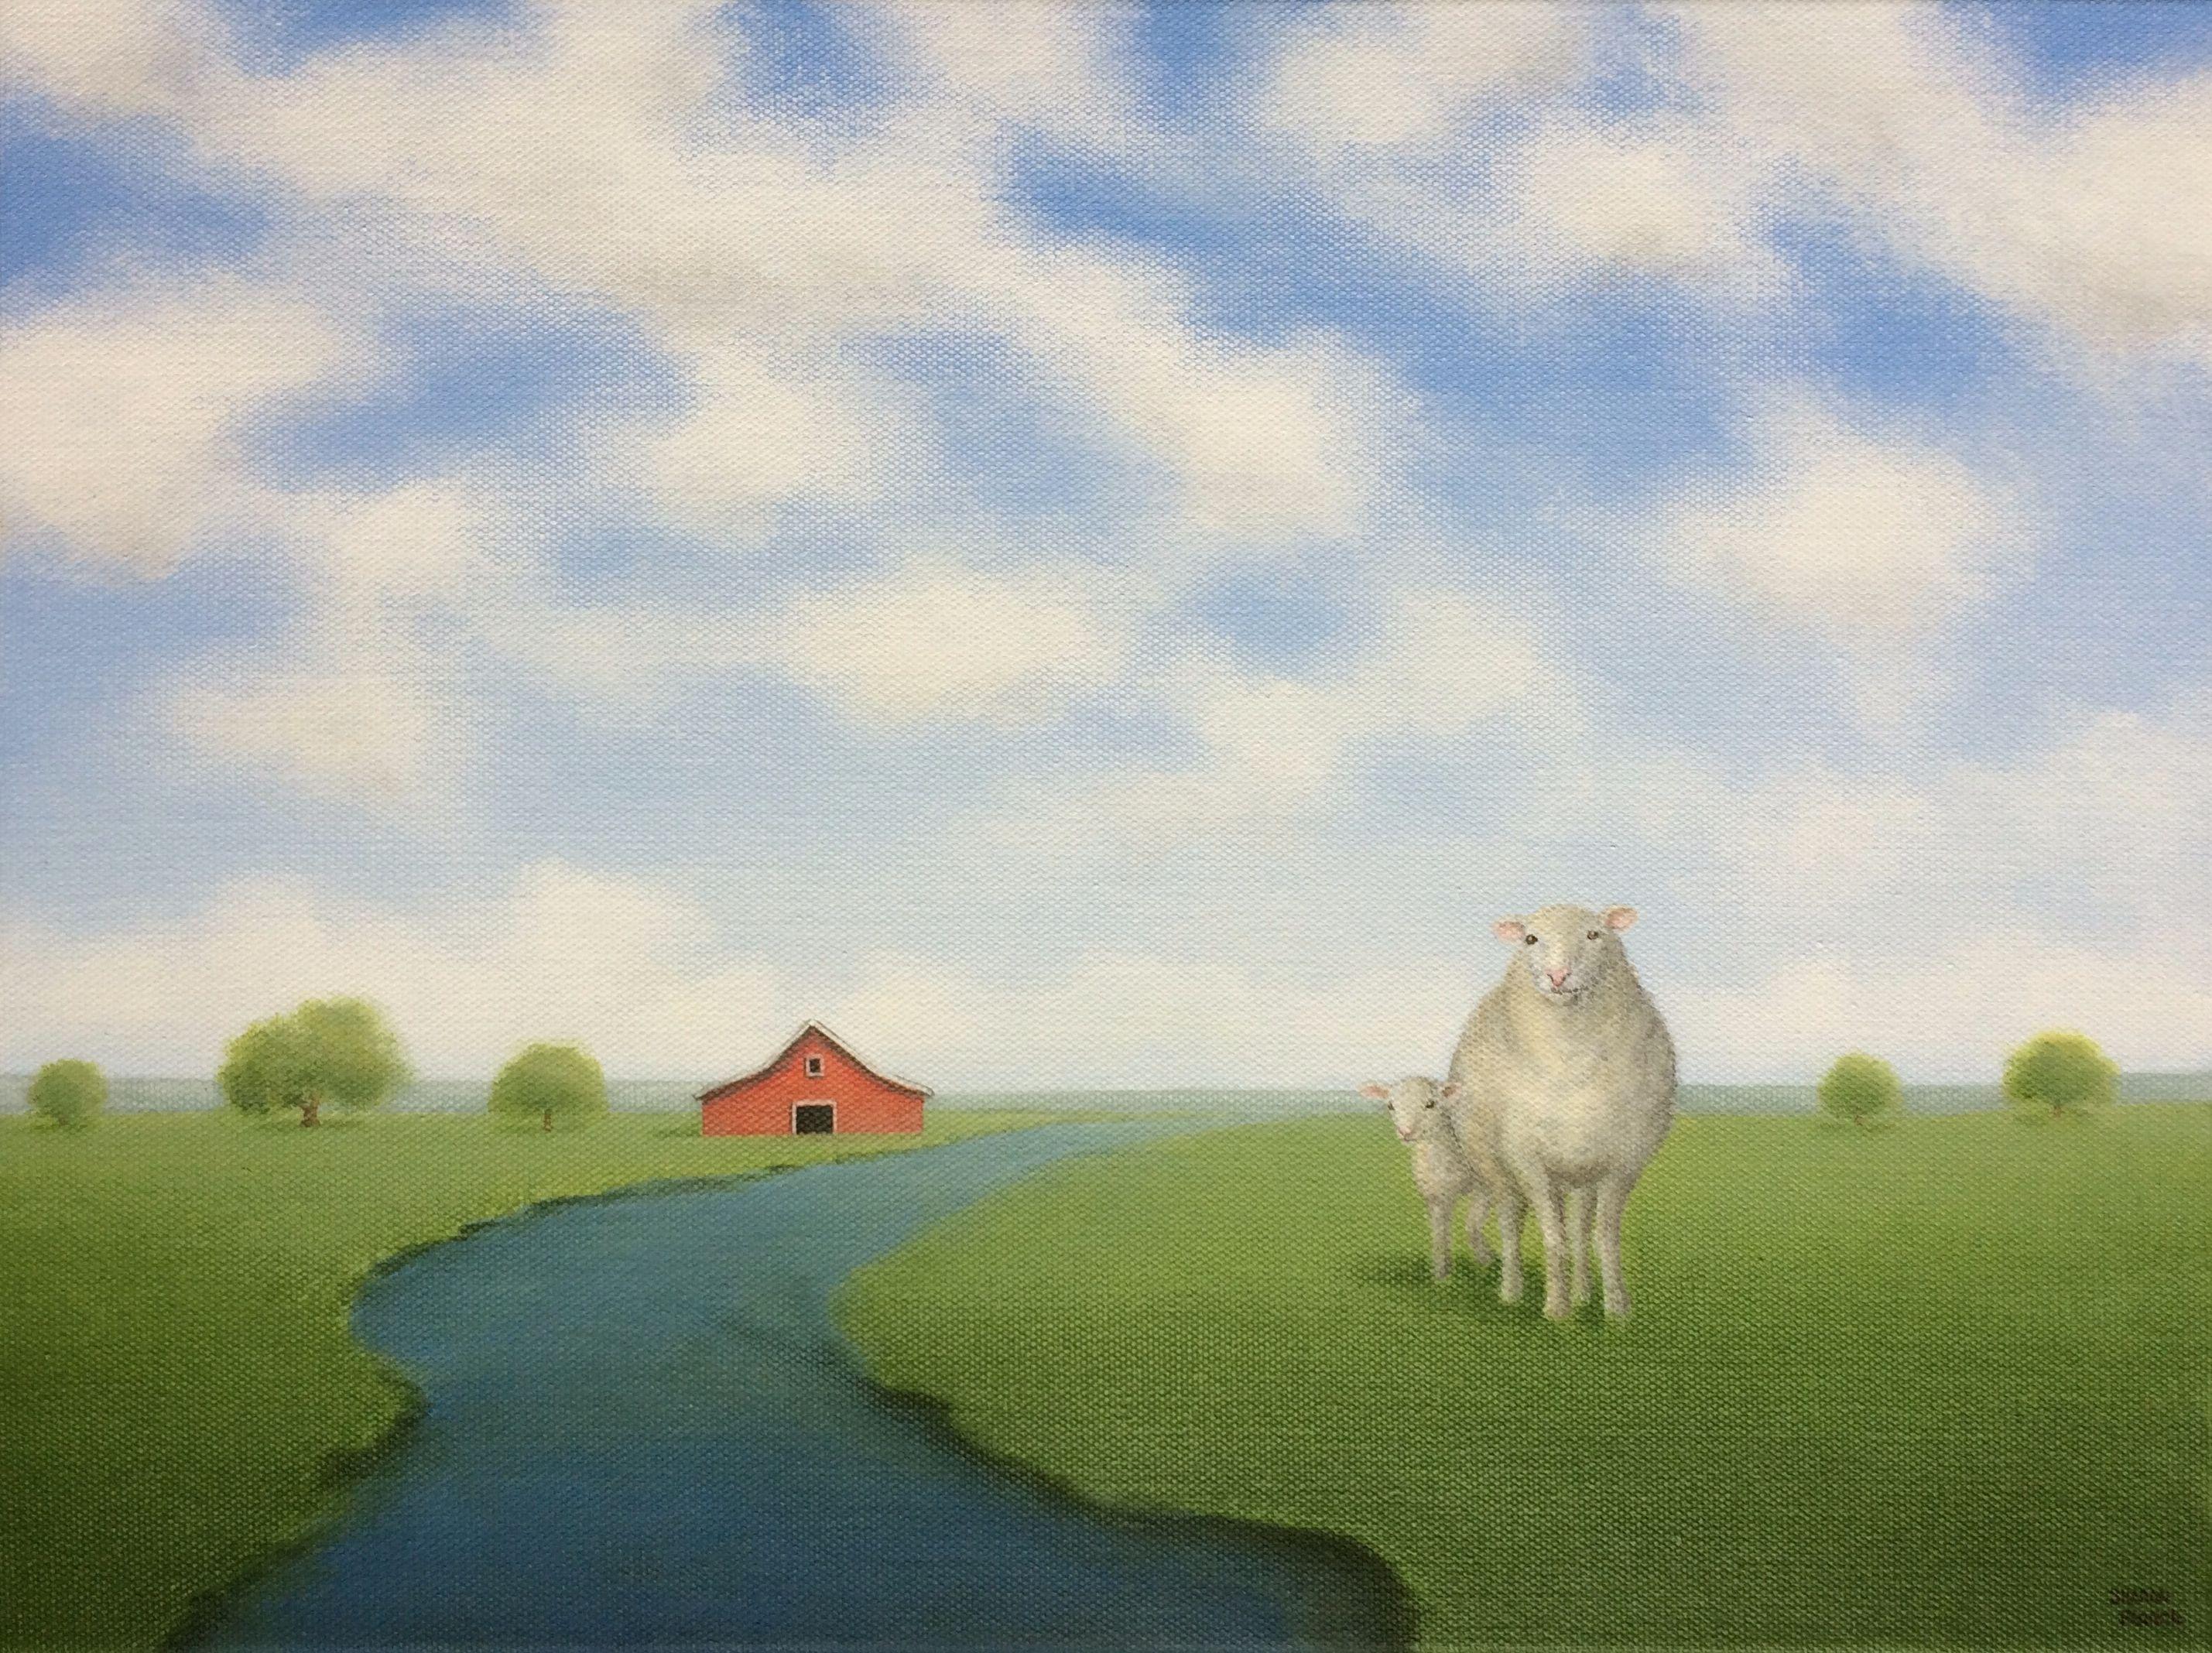   I decided on a quiet summer scene for this landscape painting from my imagination of a sheep and her little lamb by a country stream.┬á I love painting scenes of the county and what it looked like before electricity came though.┬á The painting